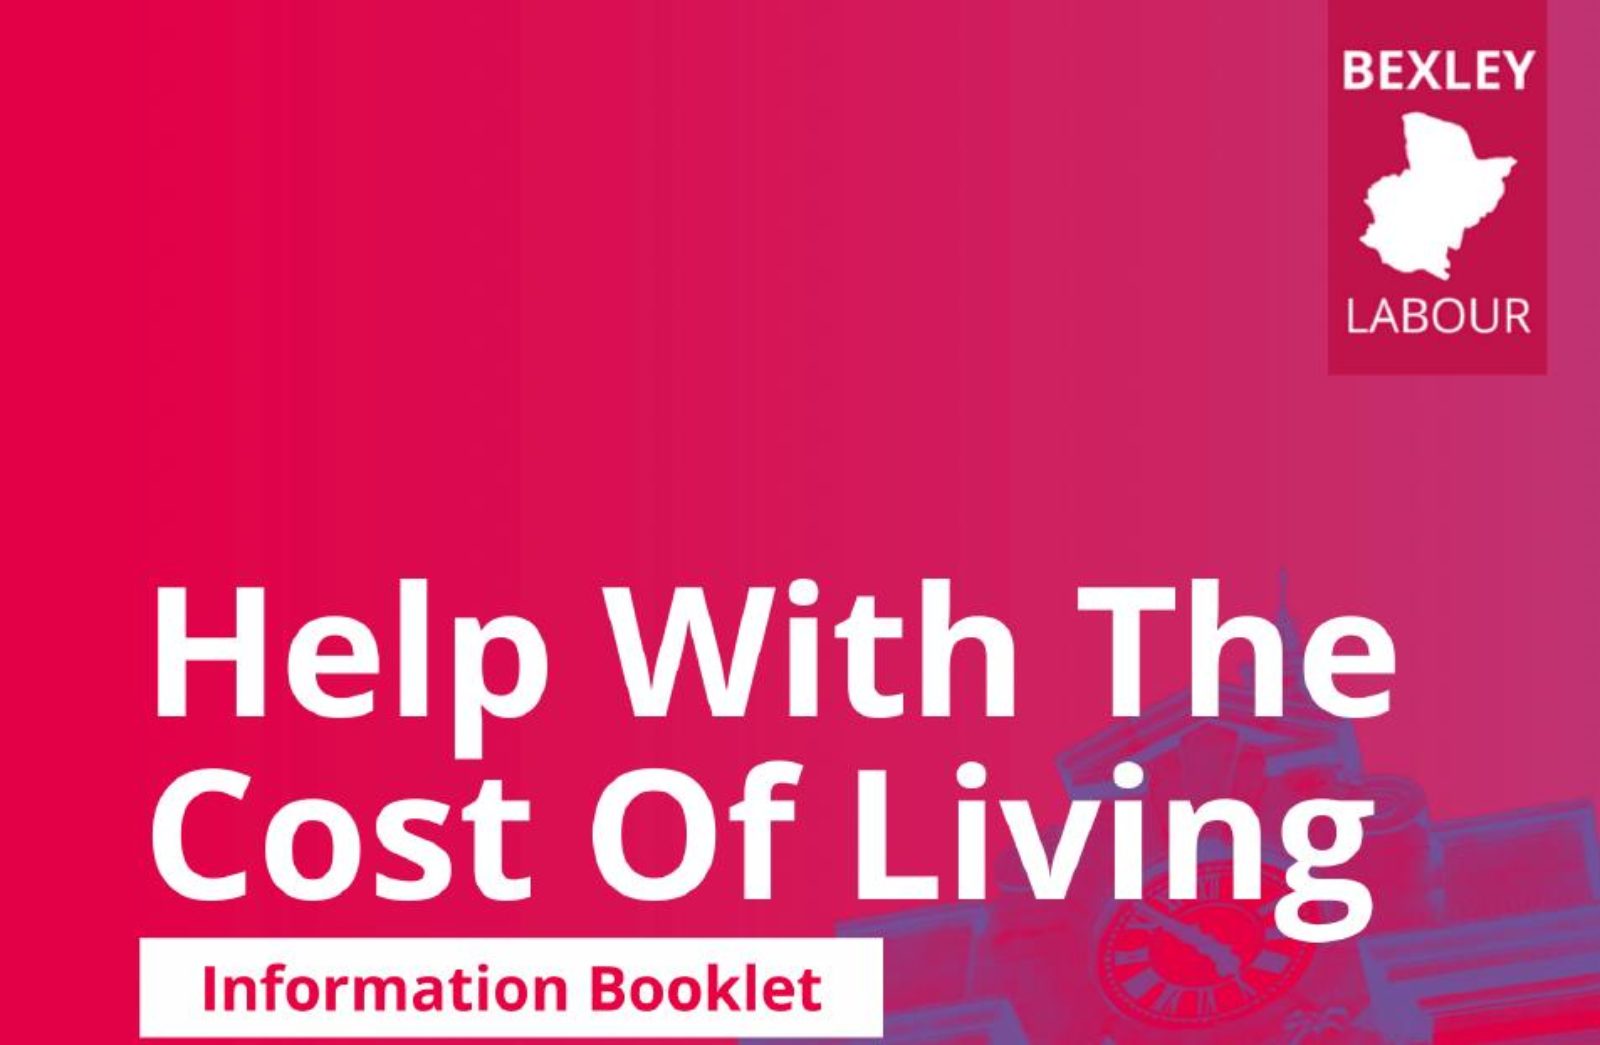 Help with the cost of living booklet